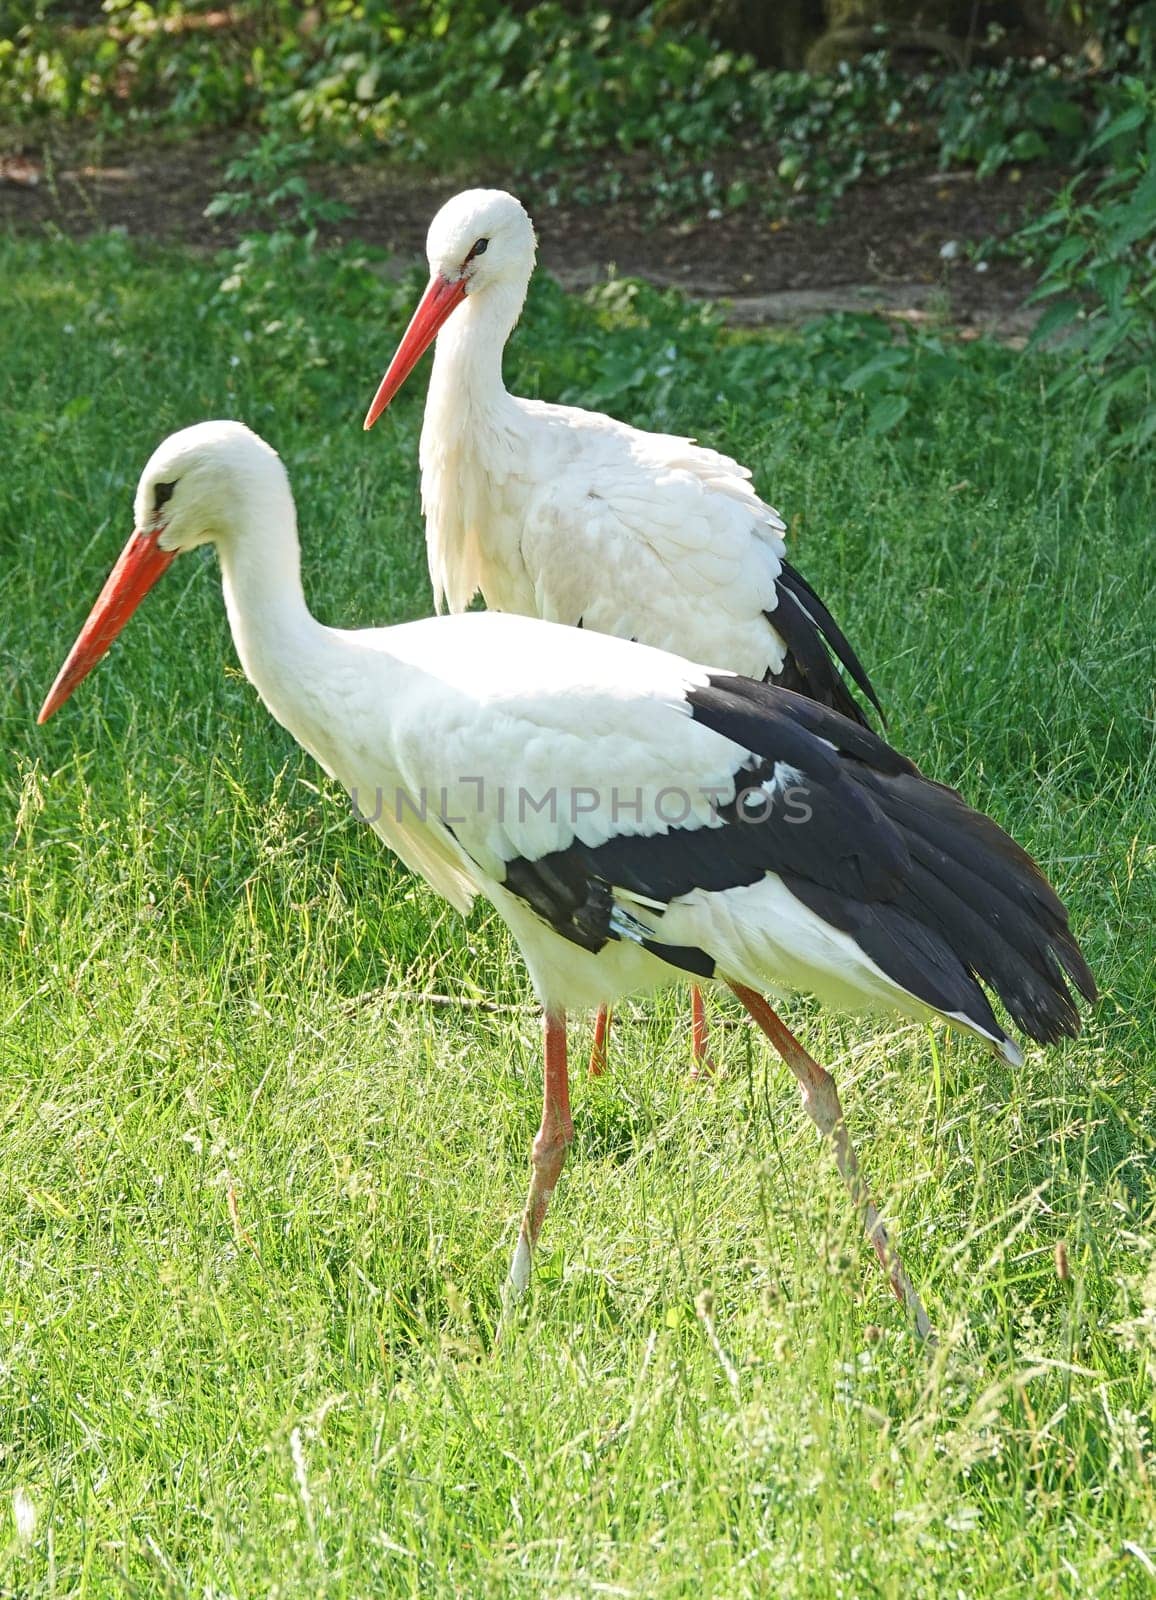 Two storks in a meadow. One stork passes the other one